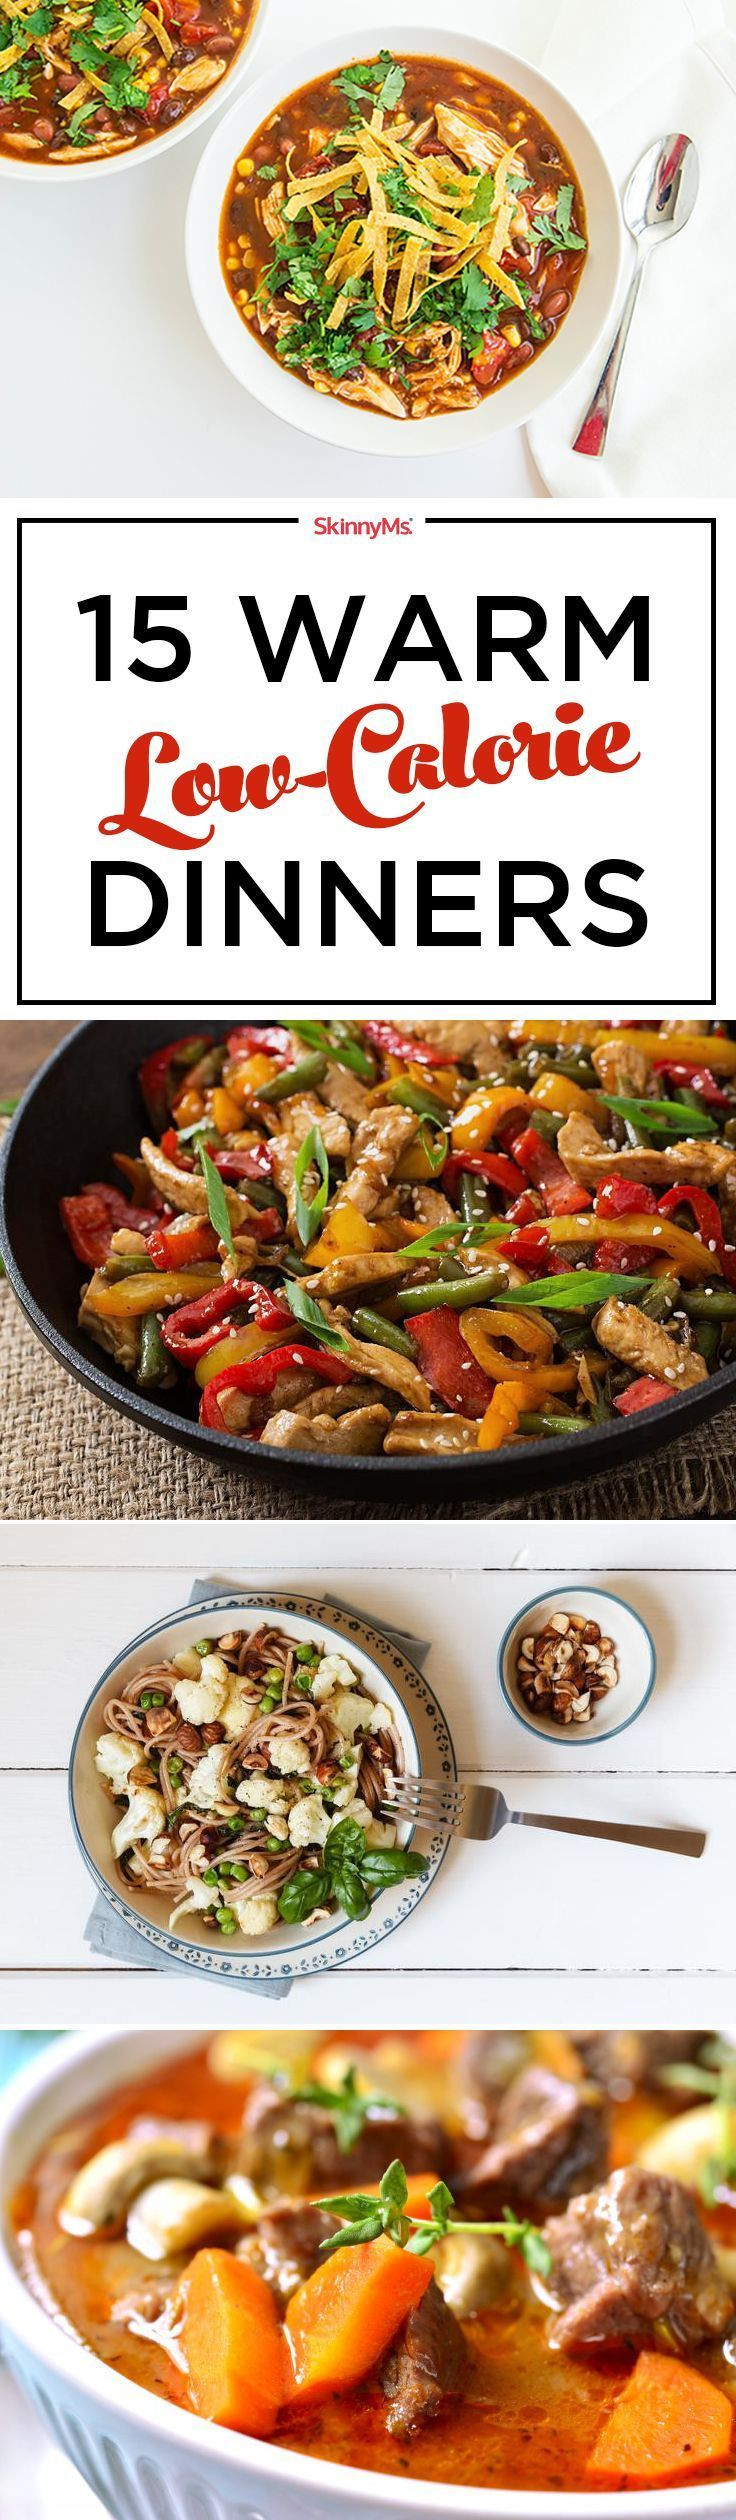 Low Calorie Dinners For Two
 1240 best images about Low Calorie Options on Pinterest